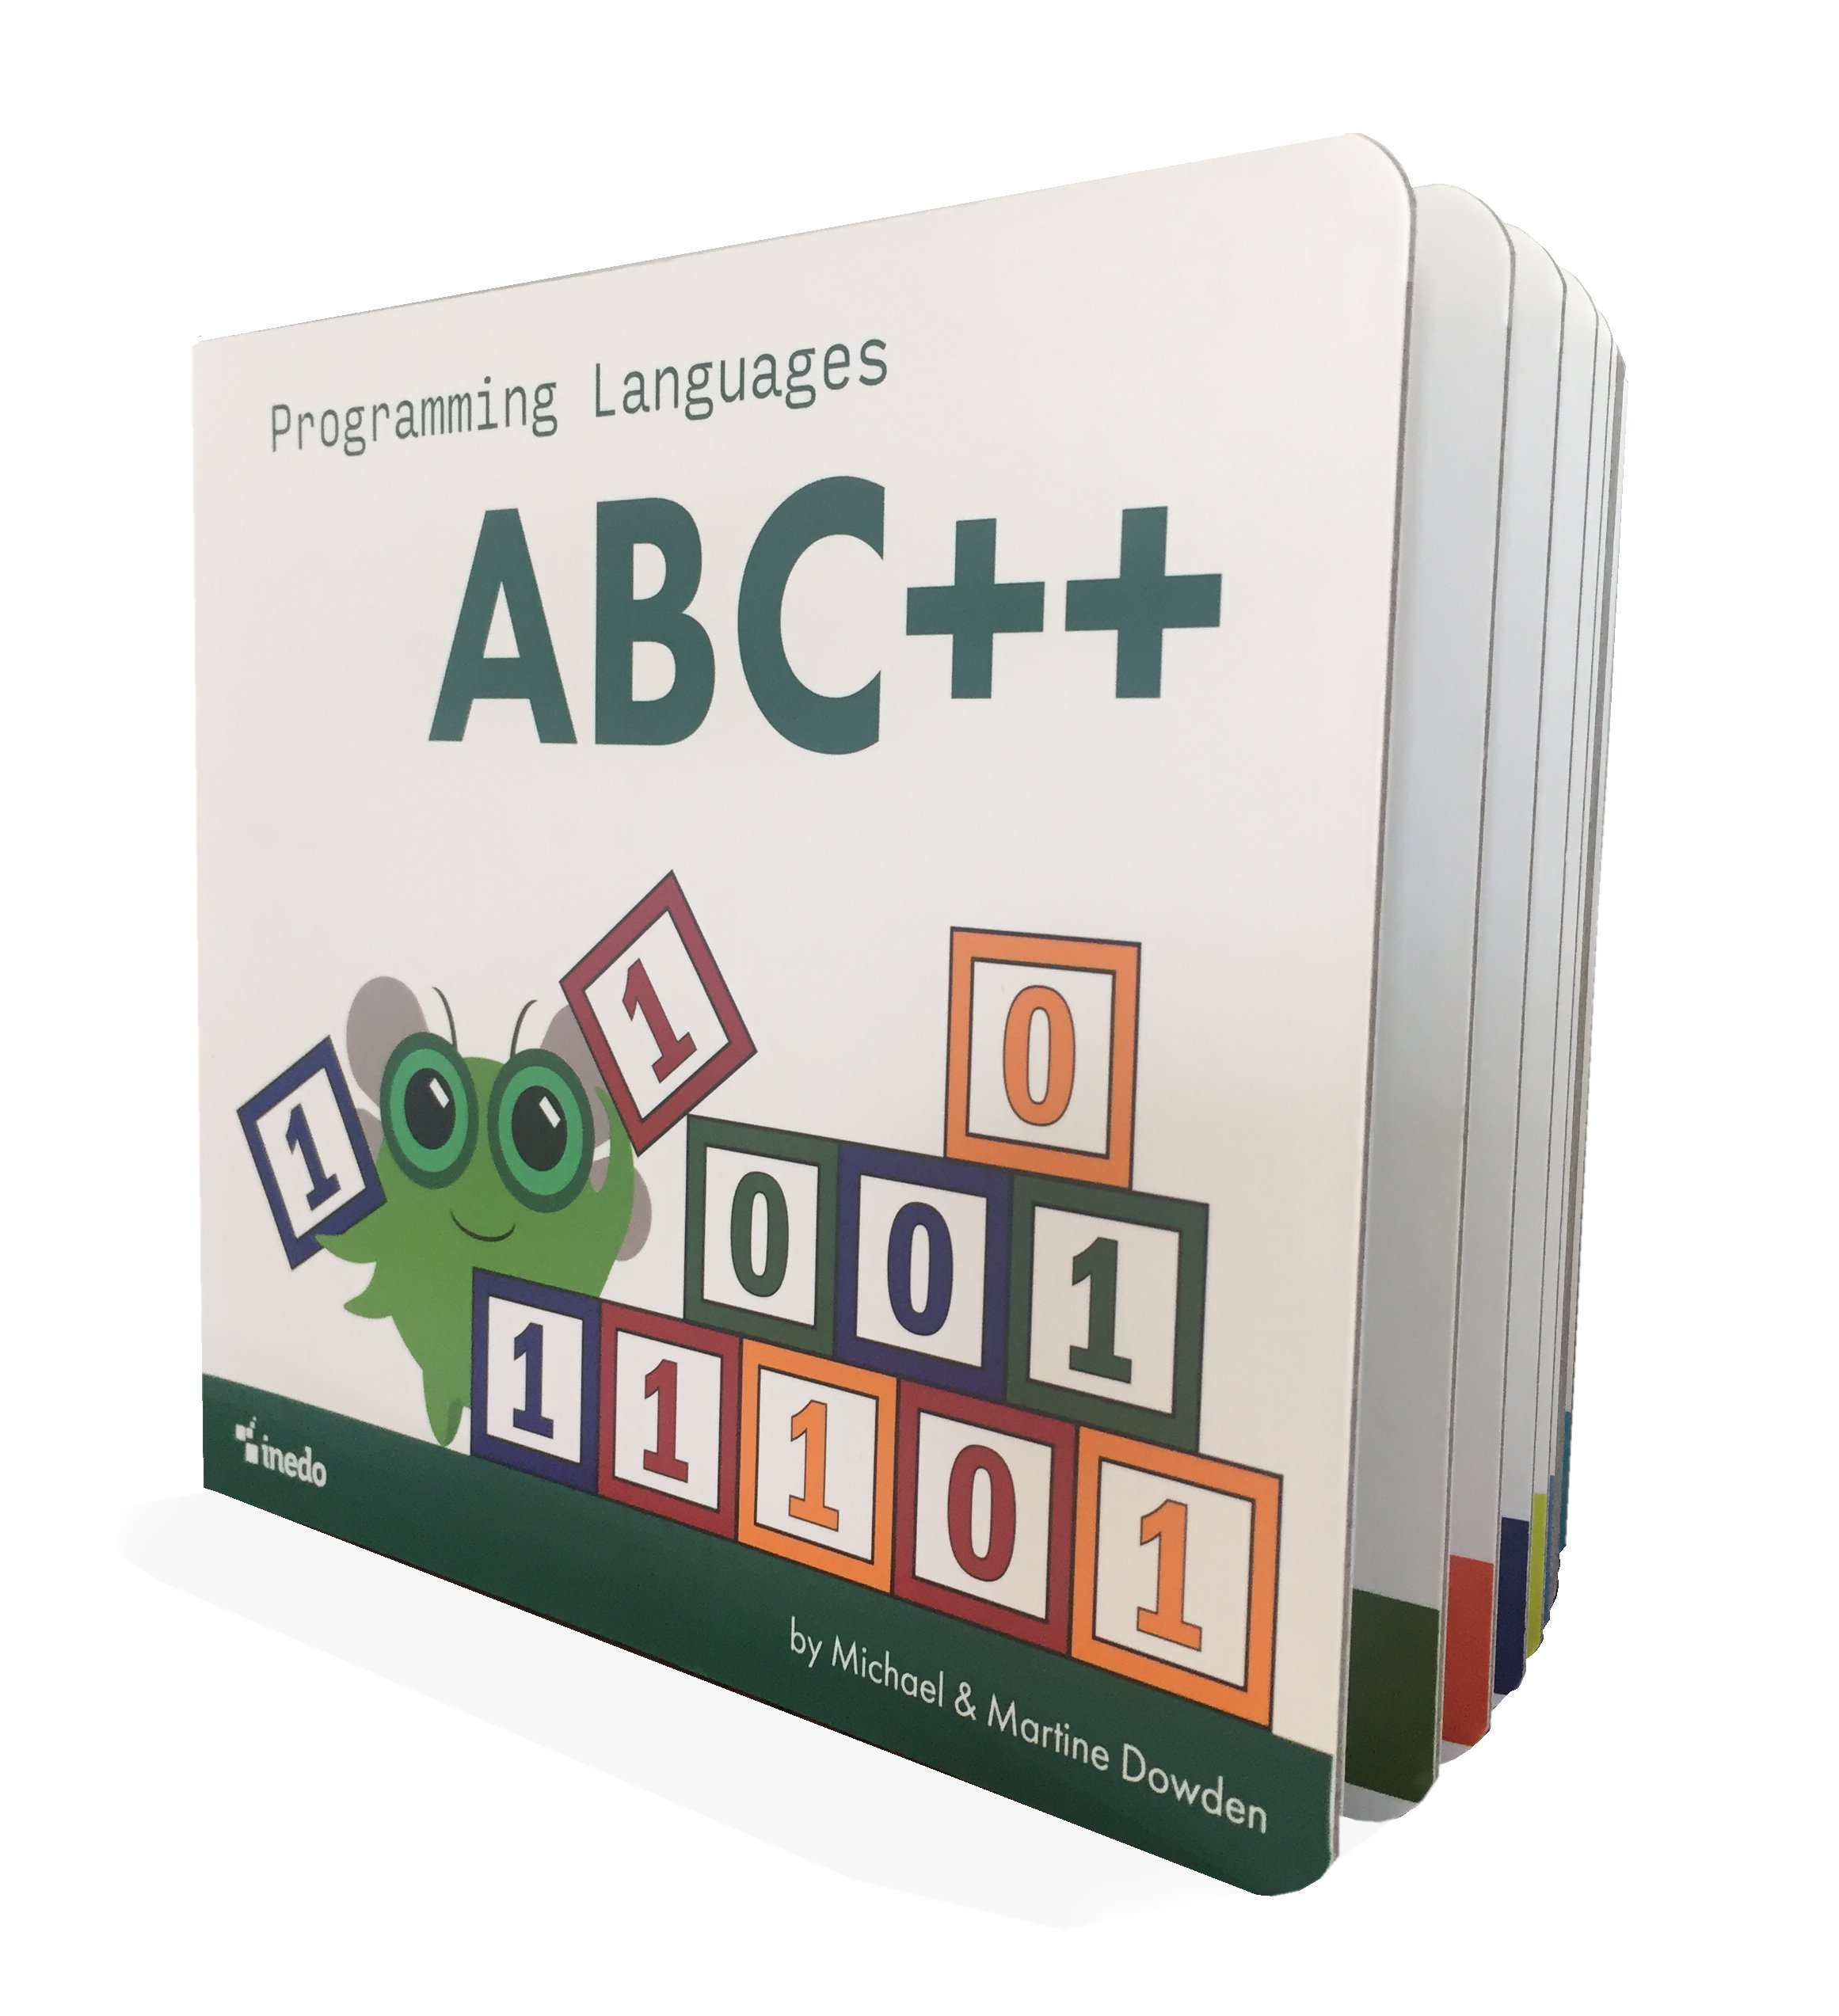 The board book copy. The cover shows the title and a cute green bug playing with cubes which have zeros and ones painted on them layout in sequence to display binary code